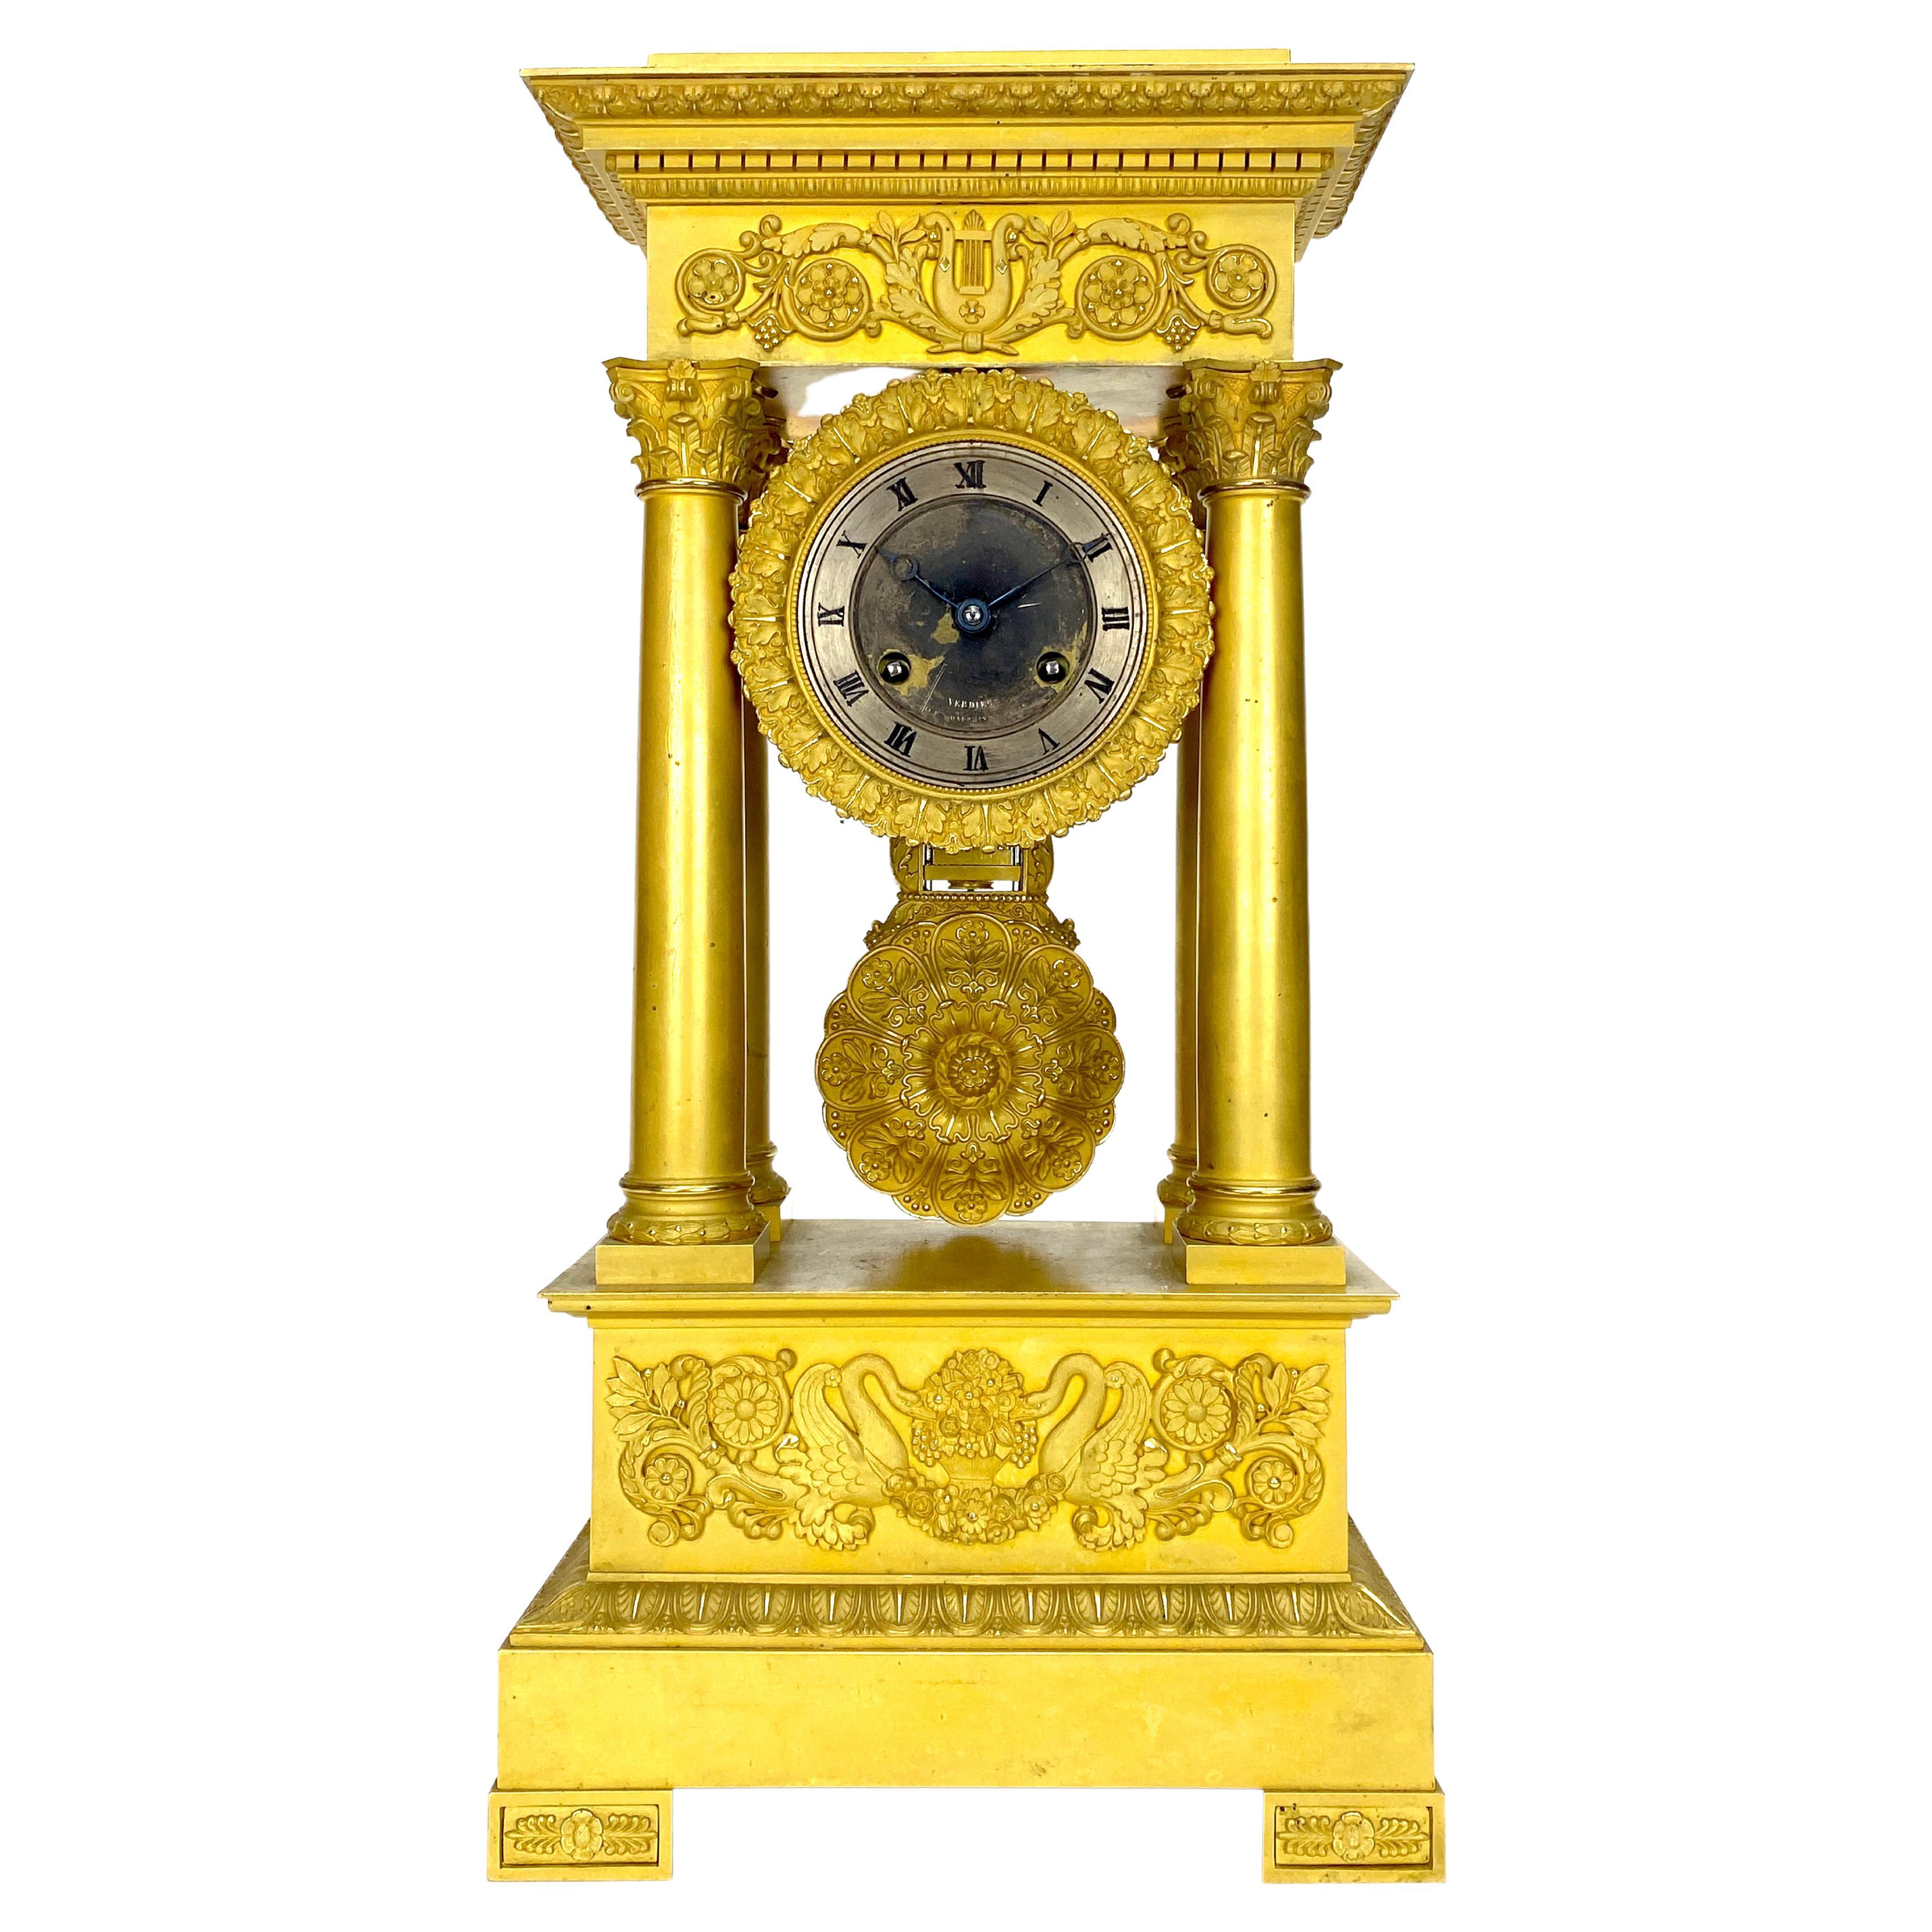 1880 Antique French Ormolu Bronze Case Portico Pillar Mantel Clock w Double Swan

MOVEMENT: 8 day wind up mechanism

FUNCTION: time with half hour and hour striking

SIZE: 19